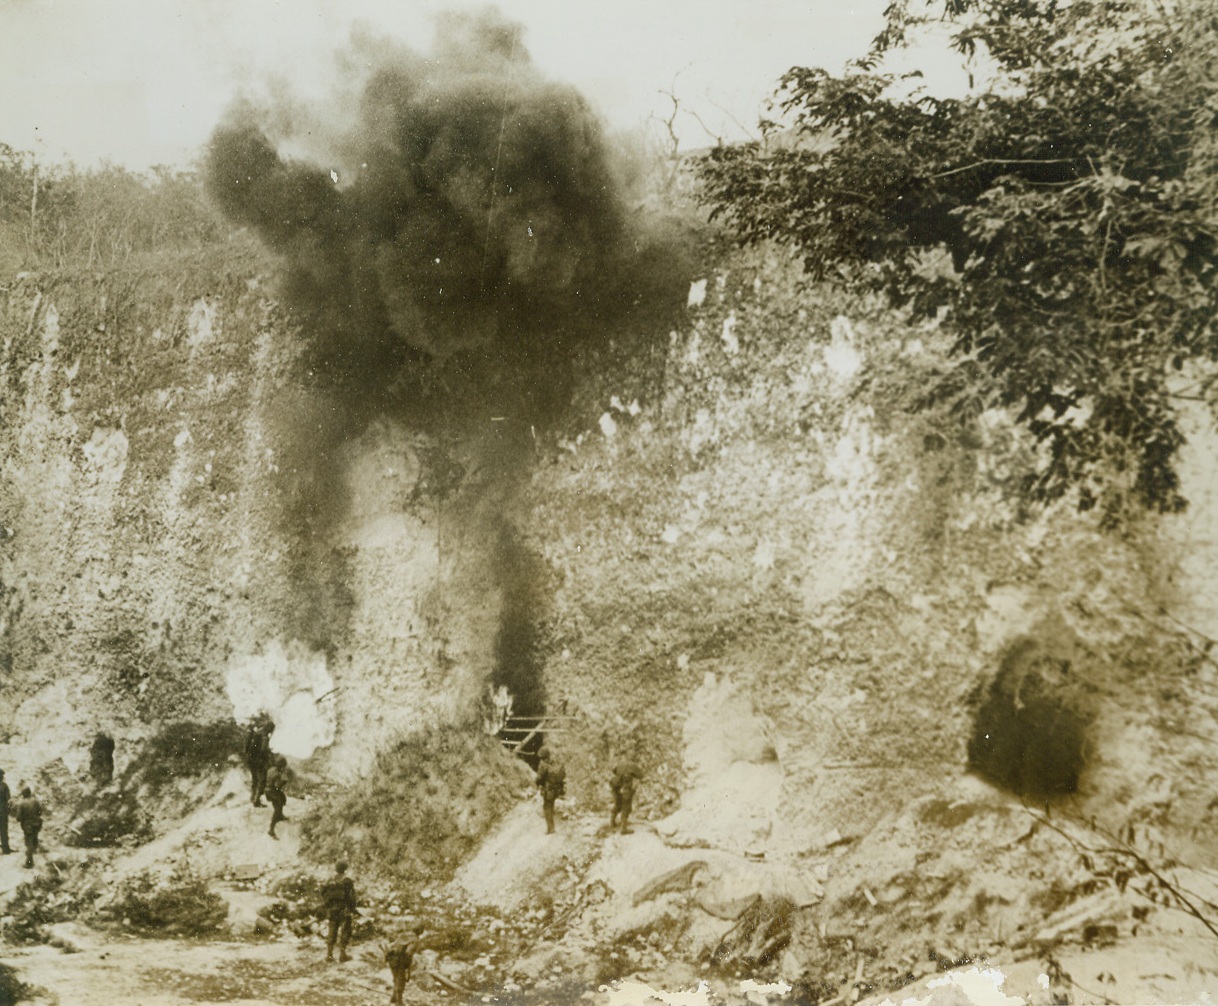 Burning Out Japs on Saipan, 7/13/1944. Marianas – American troops use flame throwers to roast the Japs out of cave hideaways in a quarry of Saipan, important base in the Marianas. U.S. forces have ended all organized Jap resistance on the island, and are using its excellent airfields for attacks on other Jap stongpoints. (Passed by Censors)Credit: ACME;